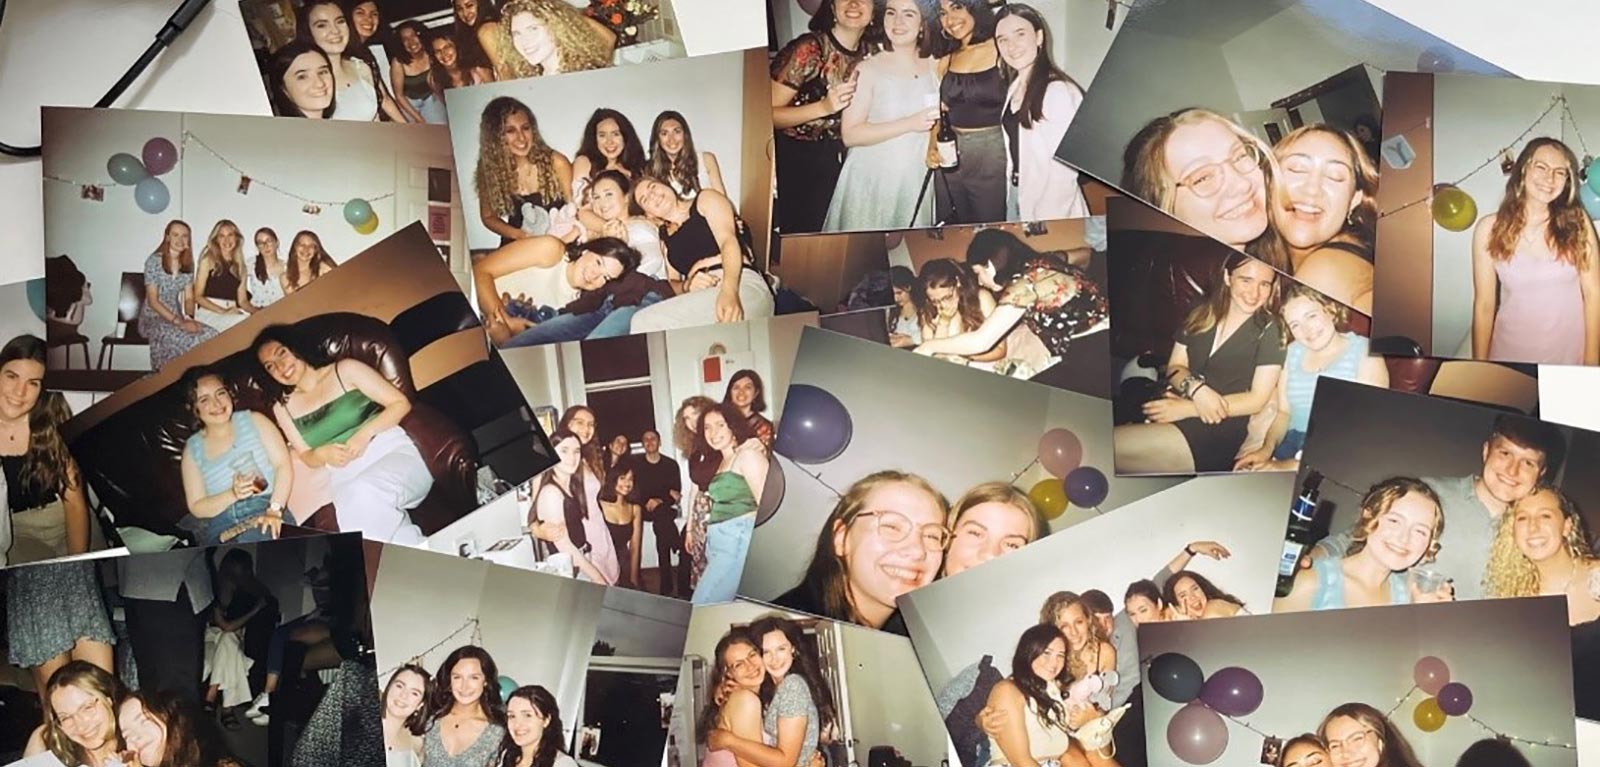 Photos of Kathryn and her friends